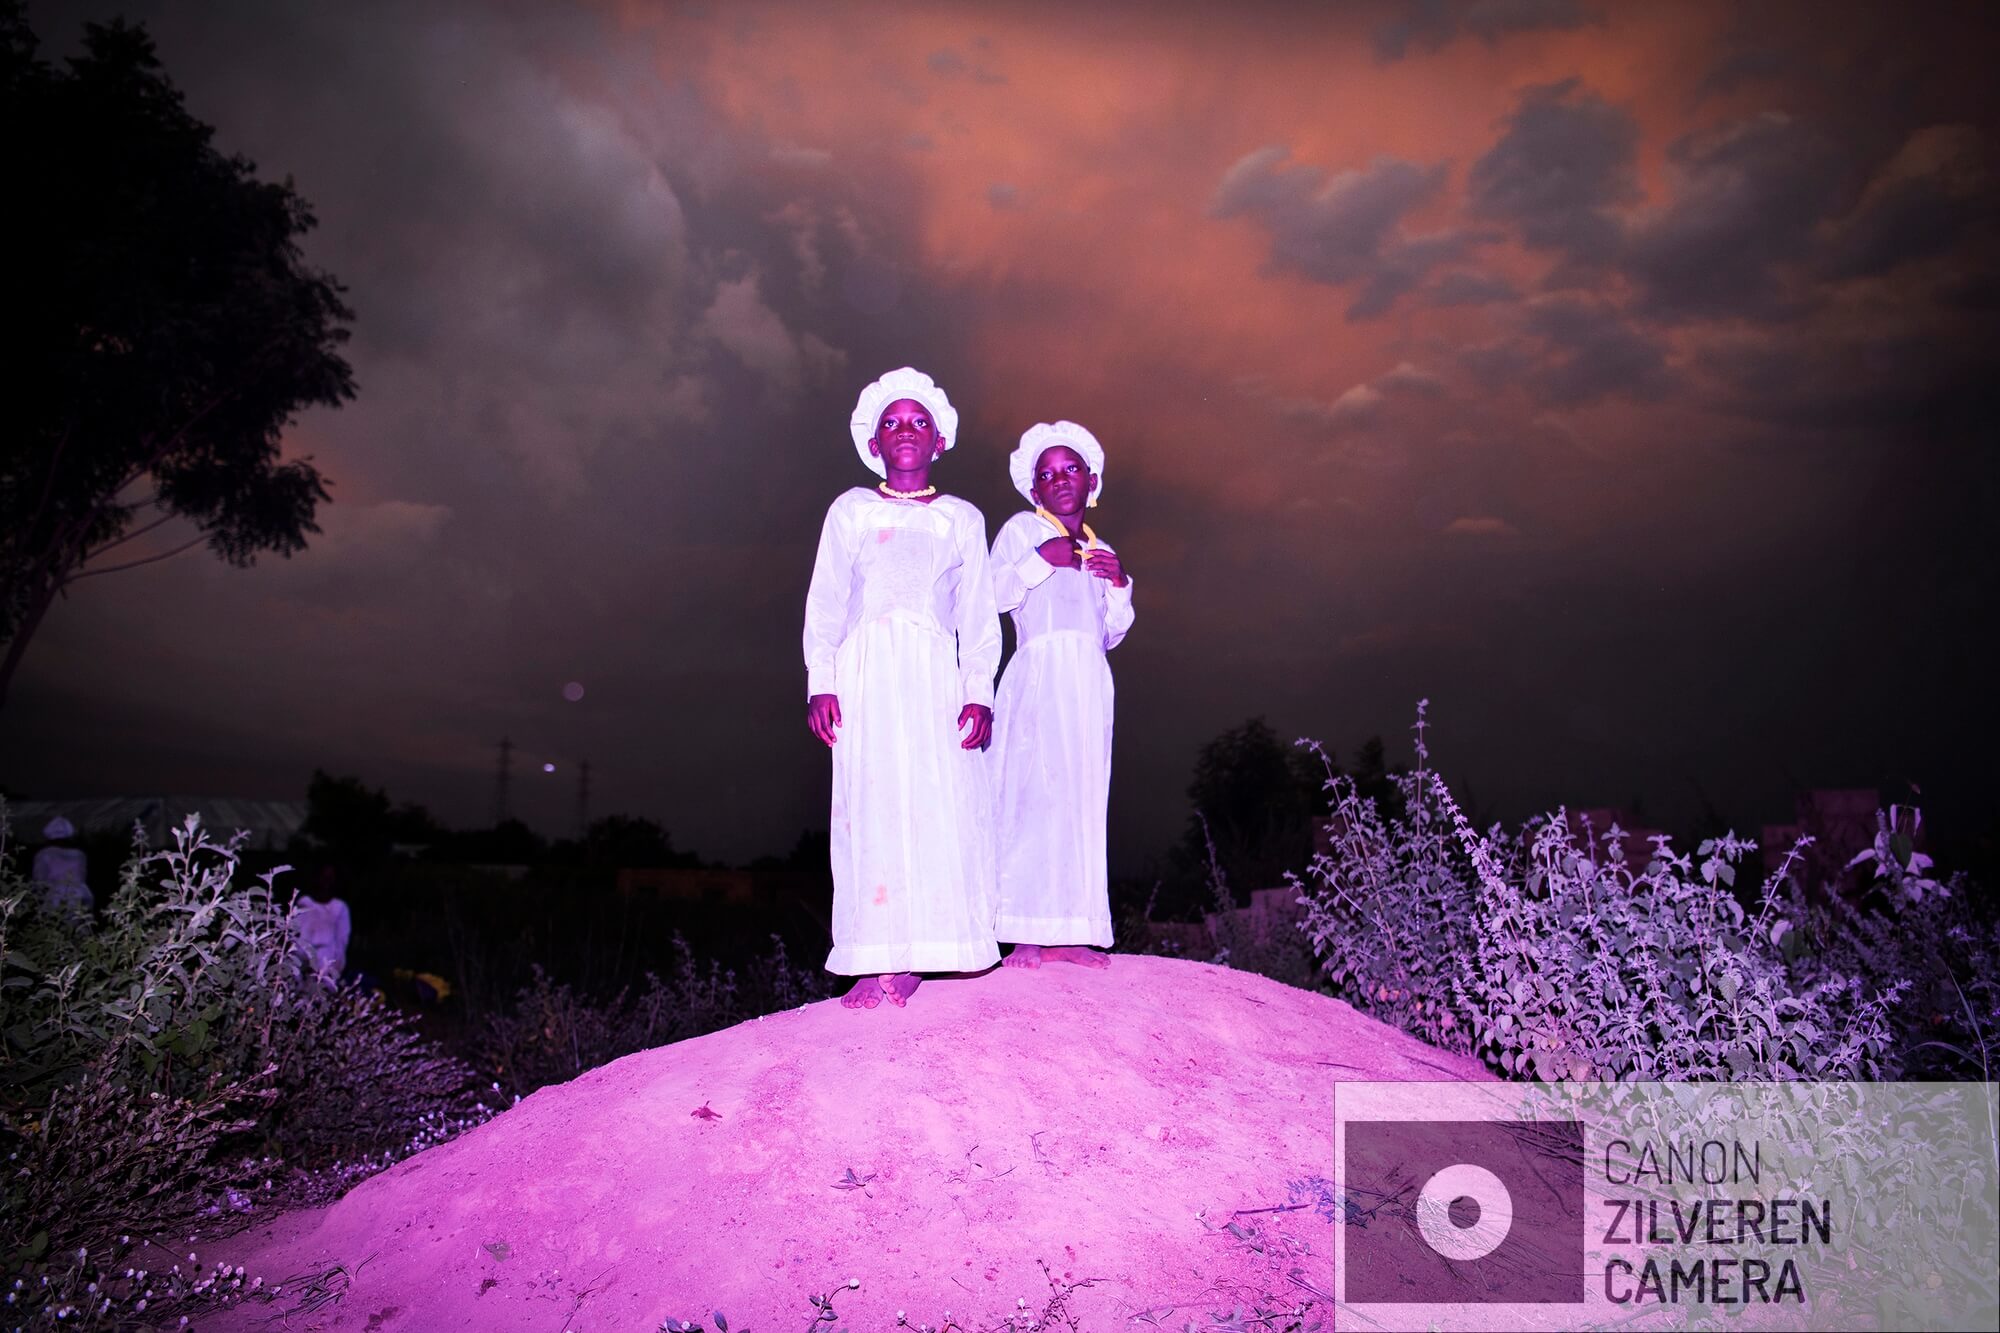 This collaborative photographic project visually investigates the mythology of twin hood and how paradoxical beliefs regarding twins manifest in Nigeria. Using twinhood as a vehicle to explore the friction between the communal and the individual embodied by the twin: two people that are one.

West Africa and specifically Yoruba-land (Nigeria’s South West) has ten times more twins than any other region in the world. Communities have developed cultural practices in response to this high twin birth rate, from veneration to demonisation. In some areas the twin spirit is worshiped and celebrated. In others, twins are vilified, persecuted and killed for their perceived role in bringing bad luck. 

By creating an aesthetic language that is meant to reflect and empower the Yoruba belief that twins are “magical” and ‘supernatural’ they aim to document twin hood in Nigeria in a way that challenges simplistic representation of African traditions.

Images are shot in/around two locations in Nigeria (2018):

Igbo Ora, ‘Twin capital of the world’ where almost each household has twins and twins are seen as a token for good luck, good health and wealth. The first edition of the ‘Twin Festival’ was held in Igbo Ora in Nov. 2018.

An orphanage in Gwagwalada where two missionaries started rescuing newborn children from being killed by their community. When born as twins or when their mother dies during child labor they are seen as an ‘evil’ spirit bringing bad luck.